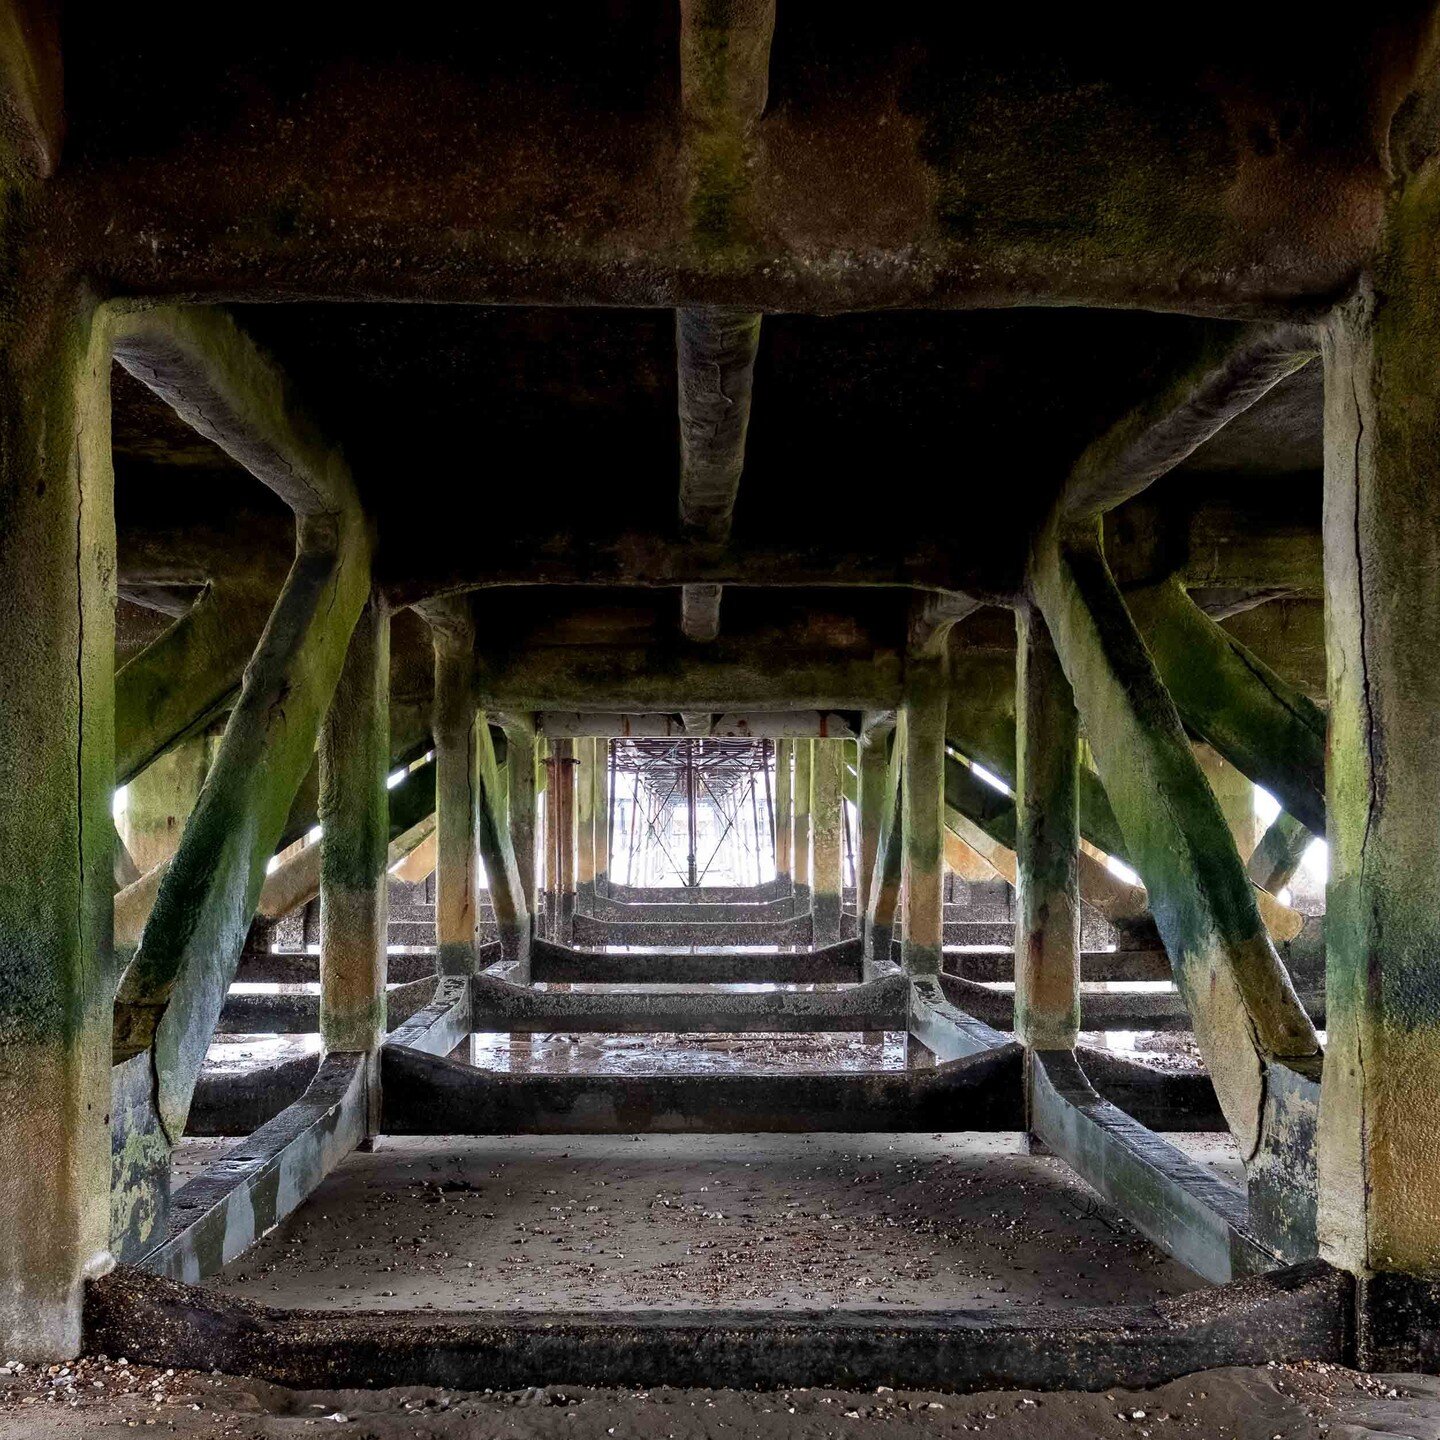 Under the Pier

How about going under it for a change?' she said as we passed the pier.
We often walk past it. Sometimes we go inside to spend a few pennies on the rides or the slot machines. But we had never been under the huge structure to see the 